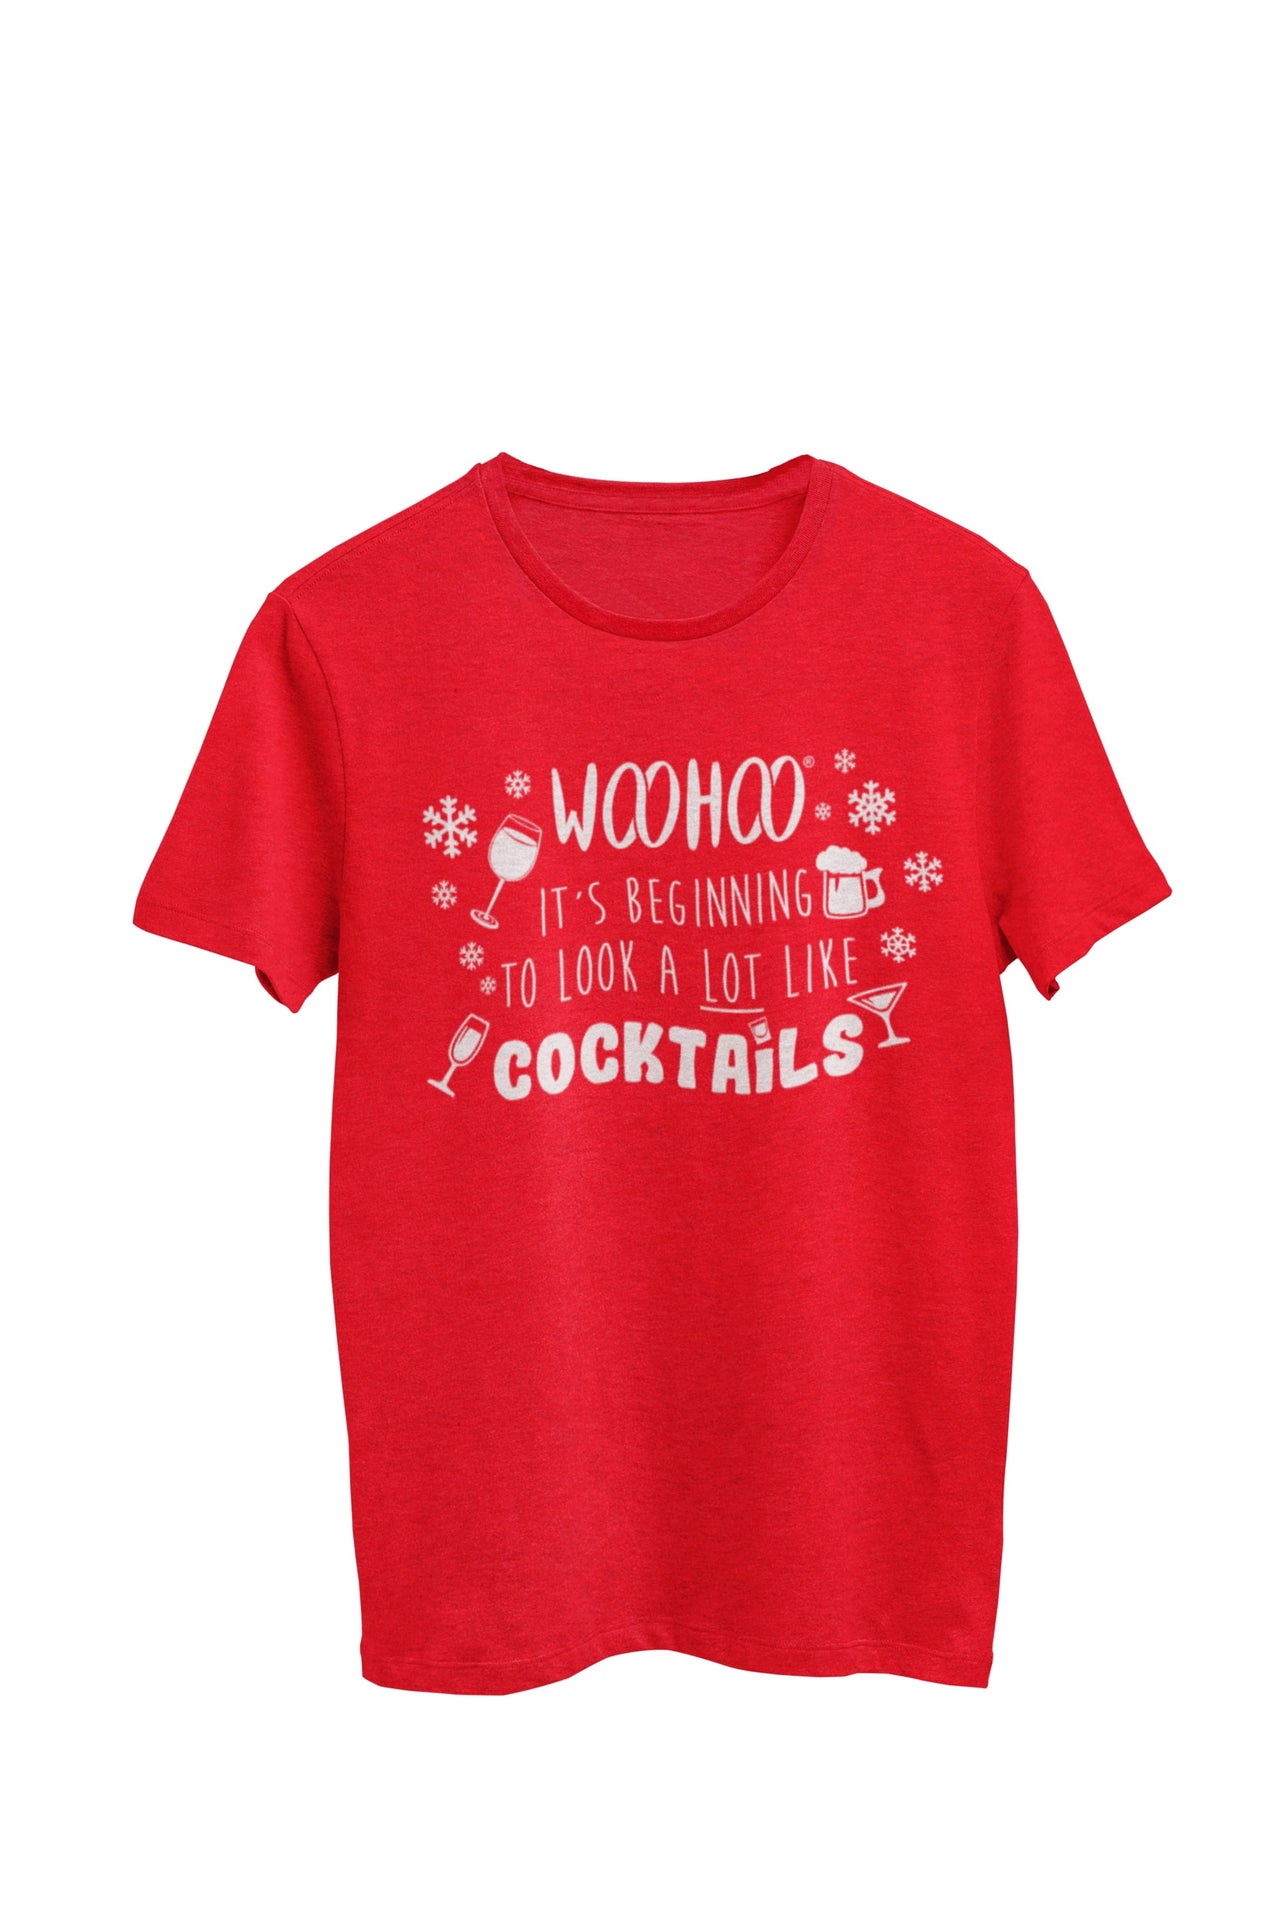 Red Heather Unisex T-shirt featuring the text 'WooHoo It's beginning to look a lot like Cocktails,' accompanied by various cocktail glasses. Designed by WooHoo Apparel.